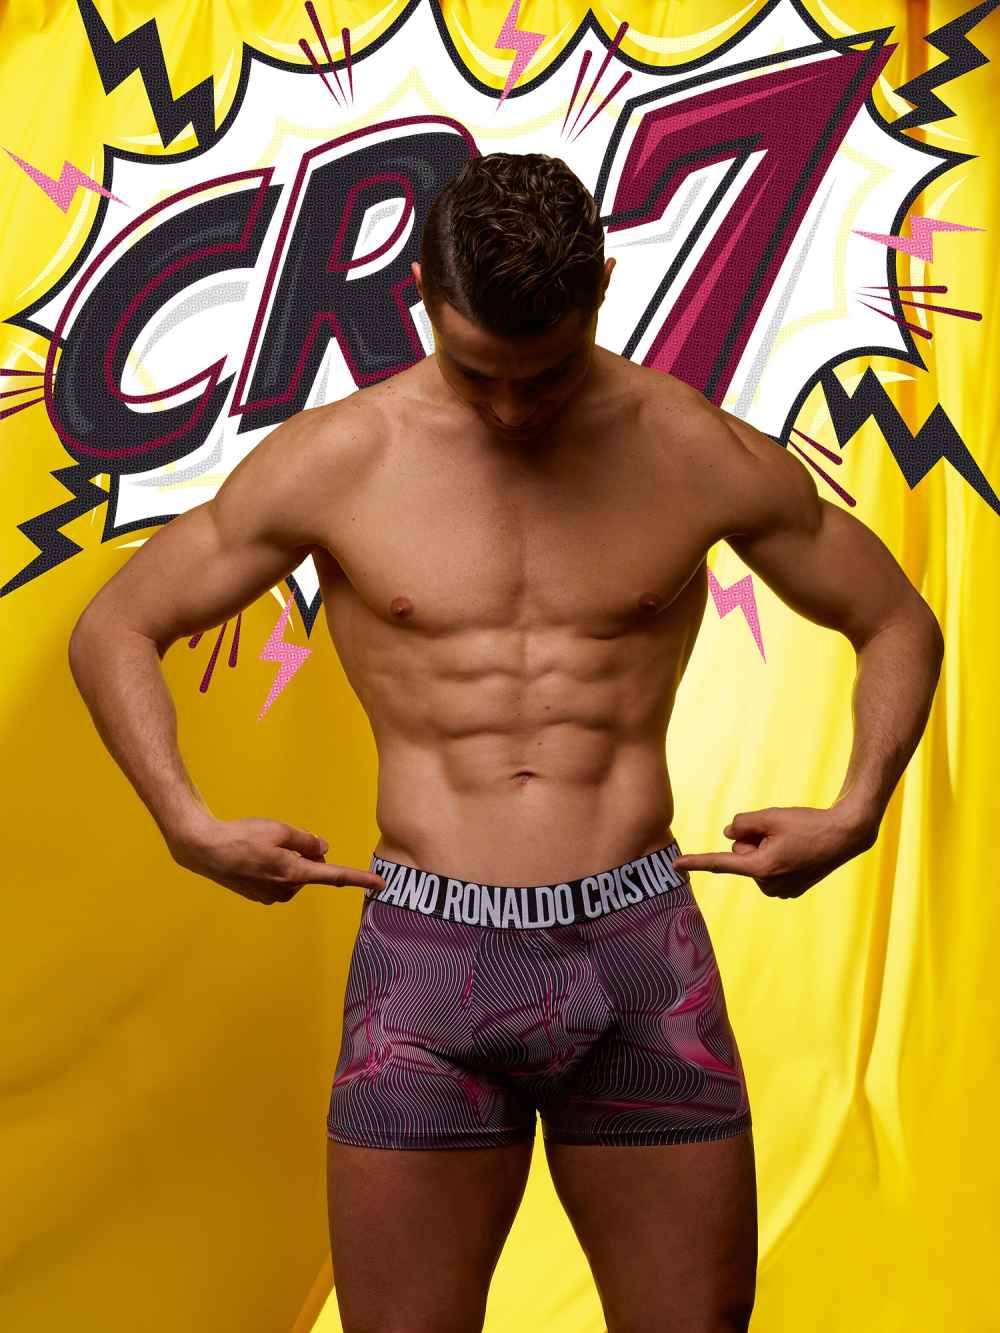 Cristiano Ronaldo's Underwear Campaign: Flaunts Six-Pack In Hot